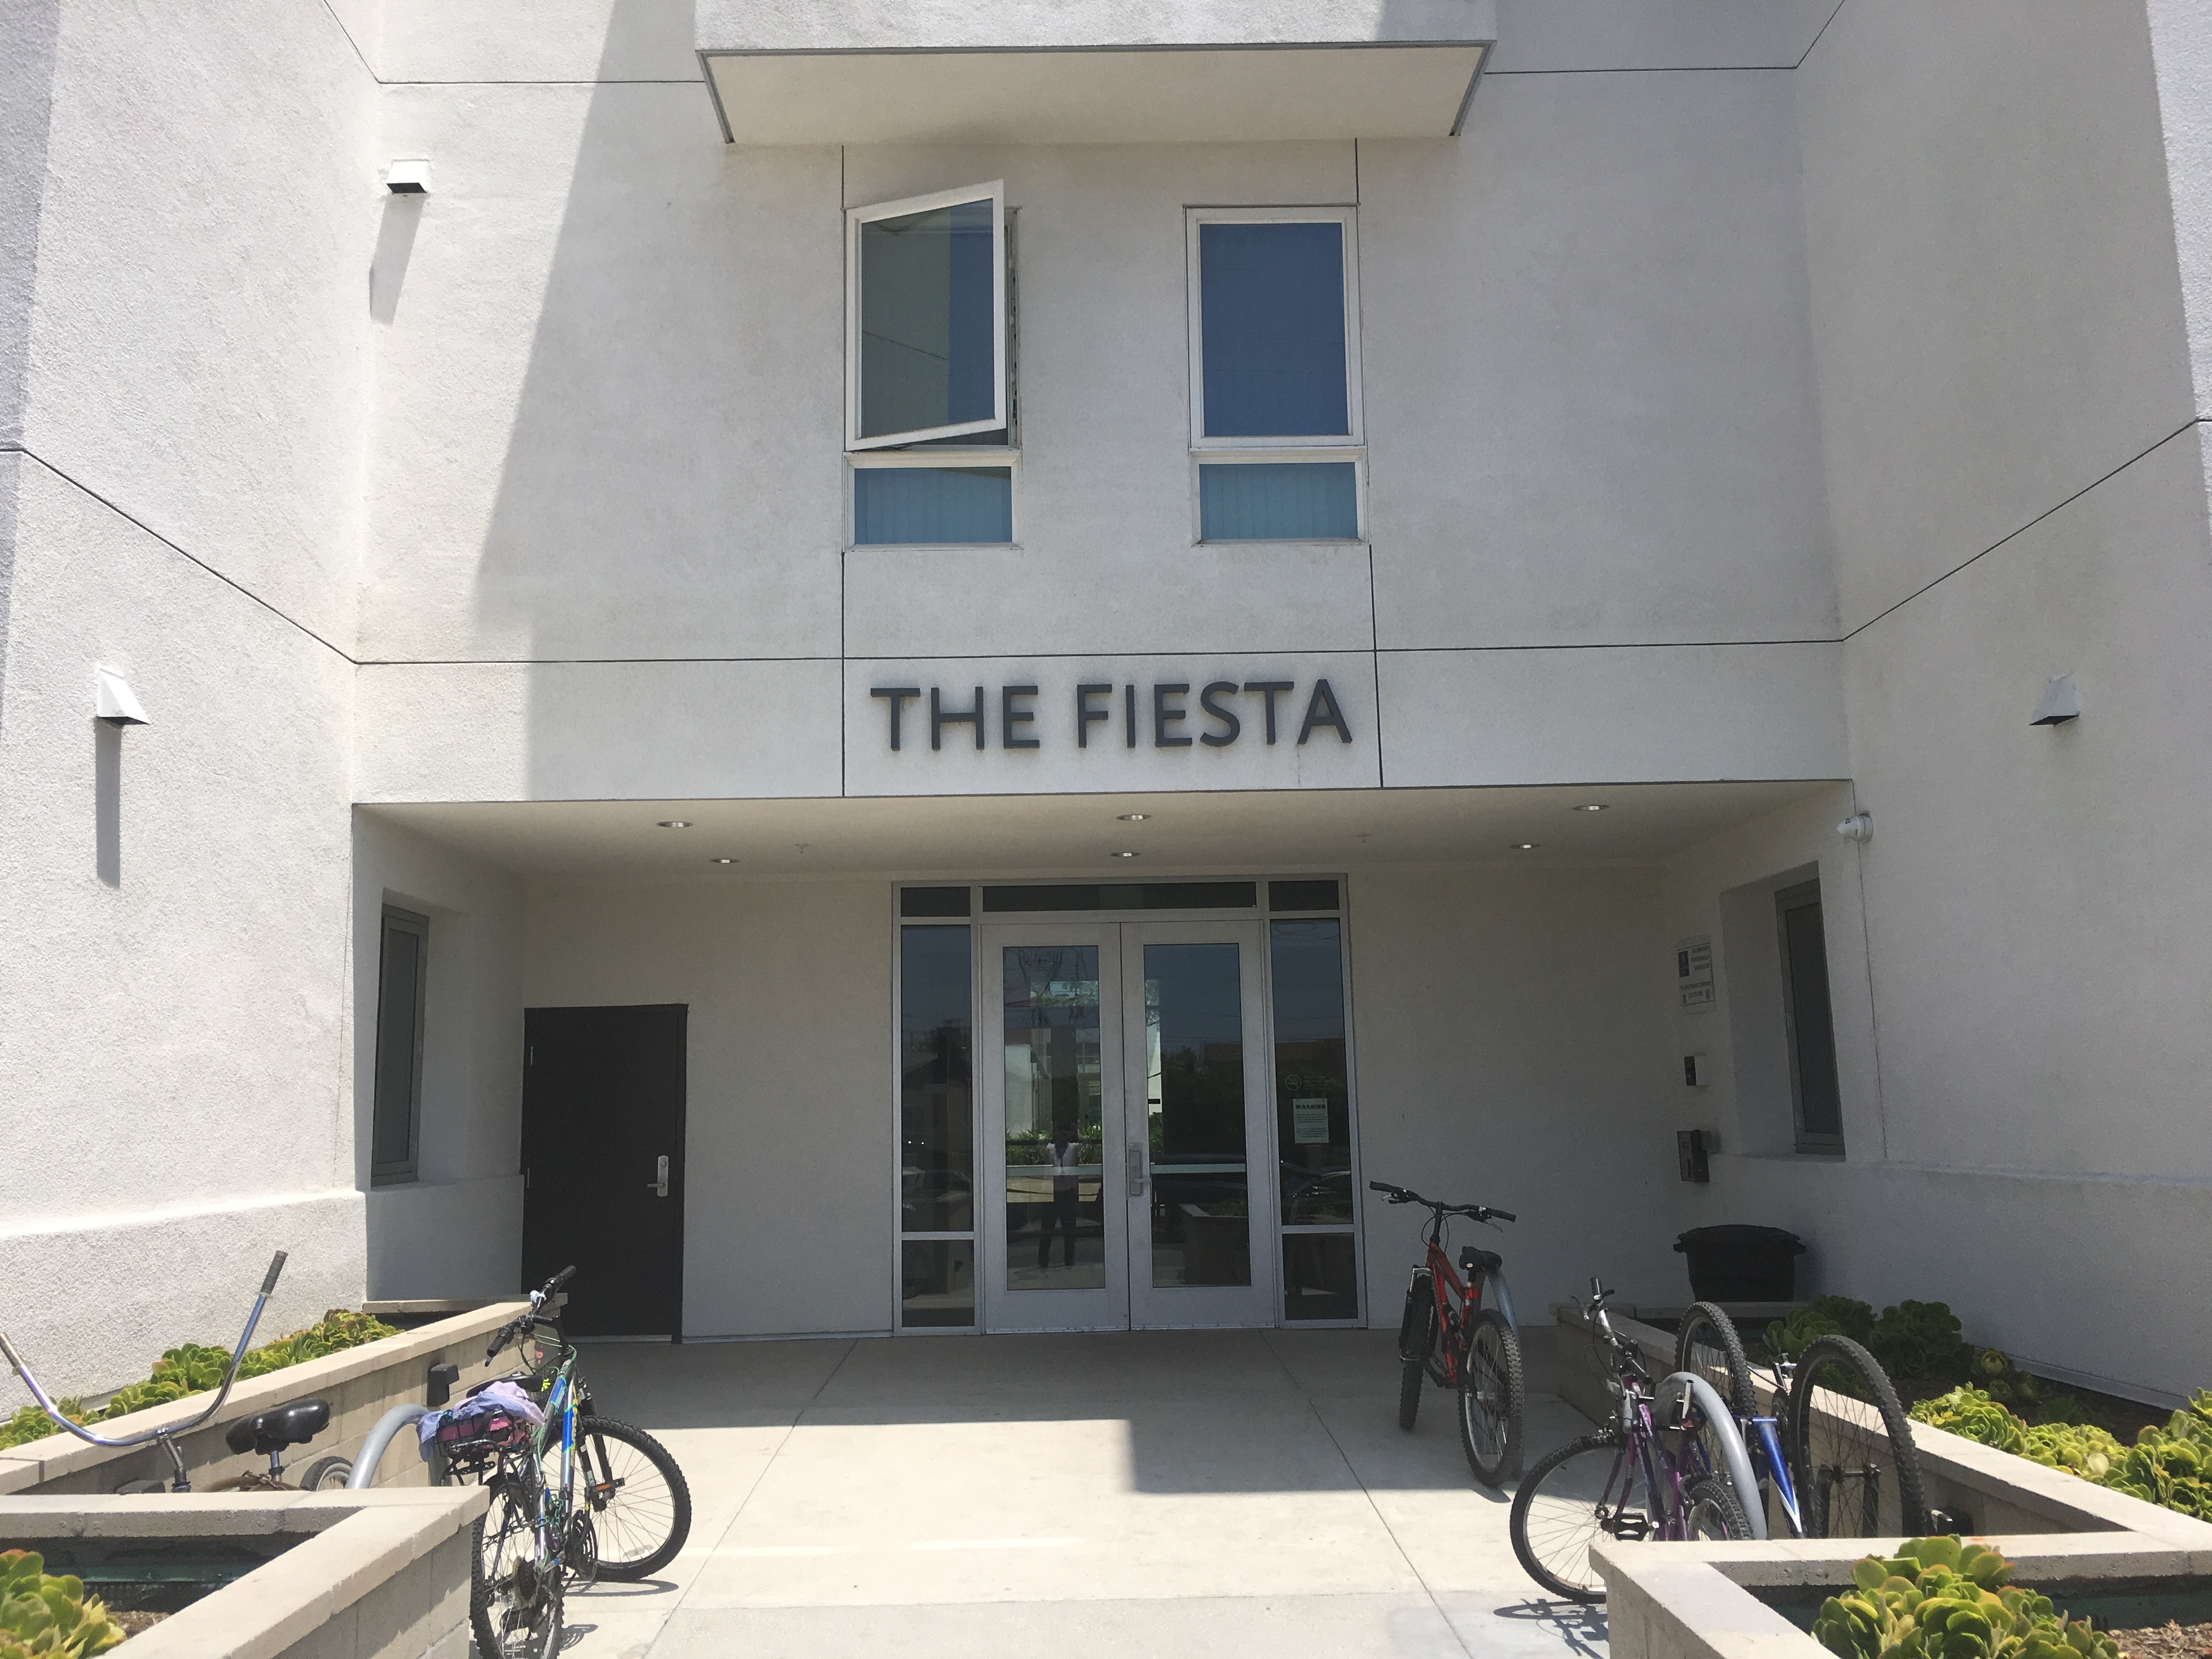 Front entrance of building with The Fiesta written on the top